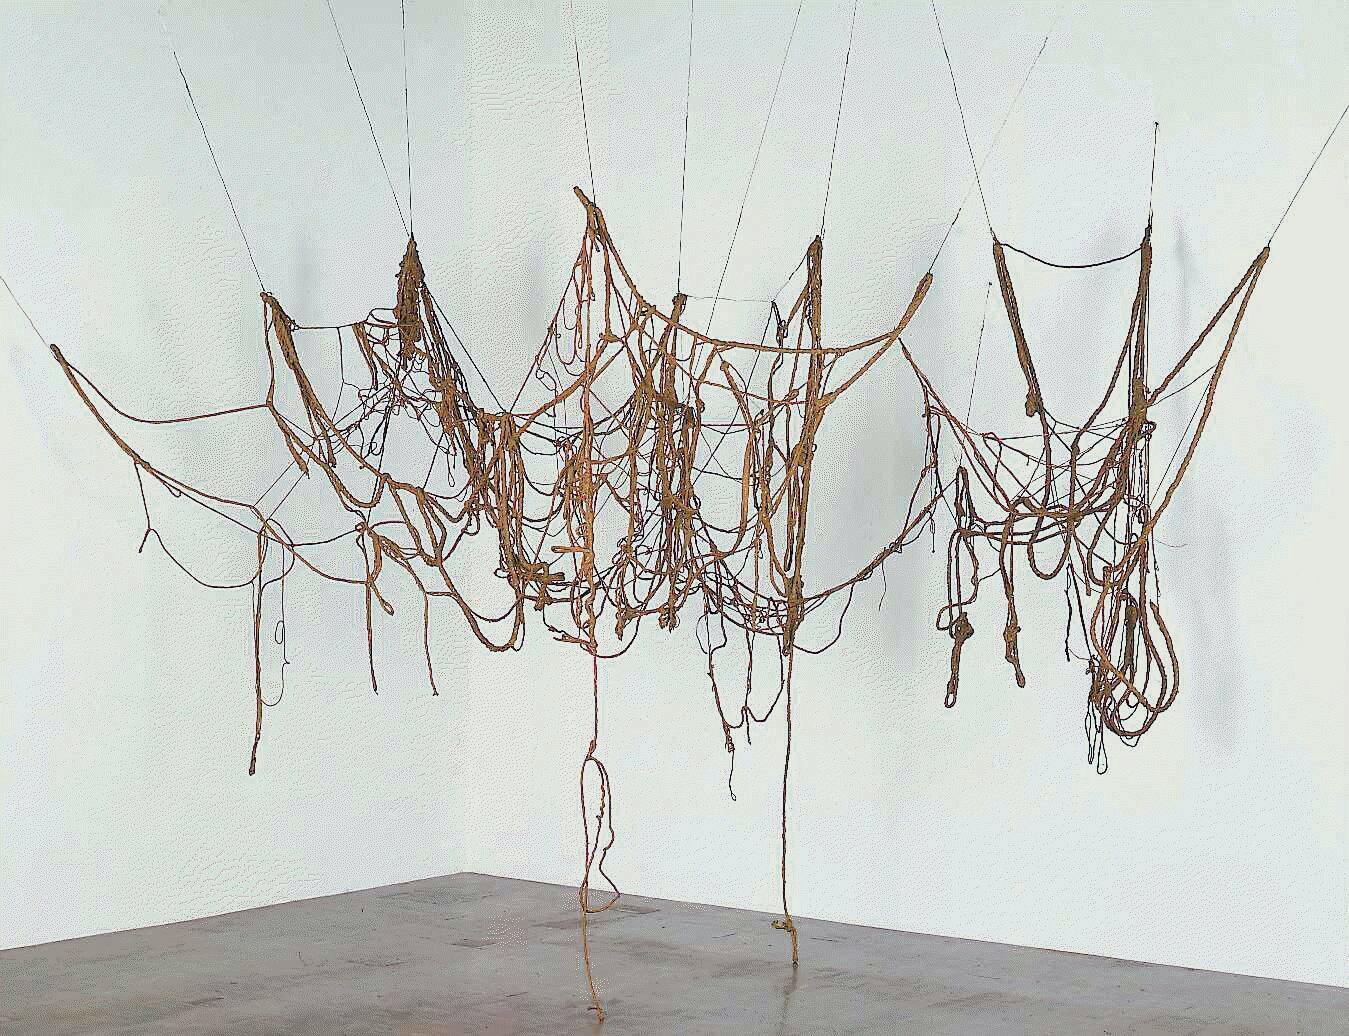 Eva Hesse, Untitled (Rope Piece), 1970, rope, latex, string, wire, variable dimensions (Whitney Museum of American Art, New York)